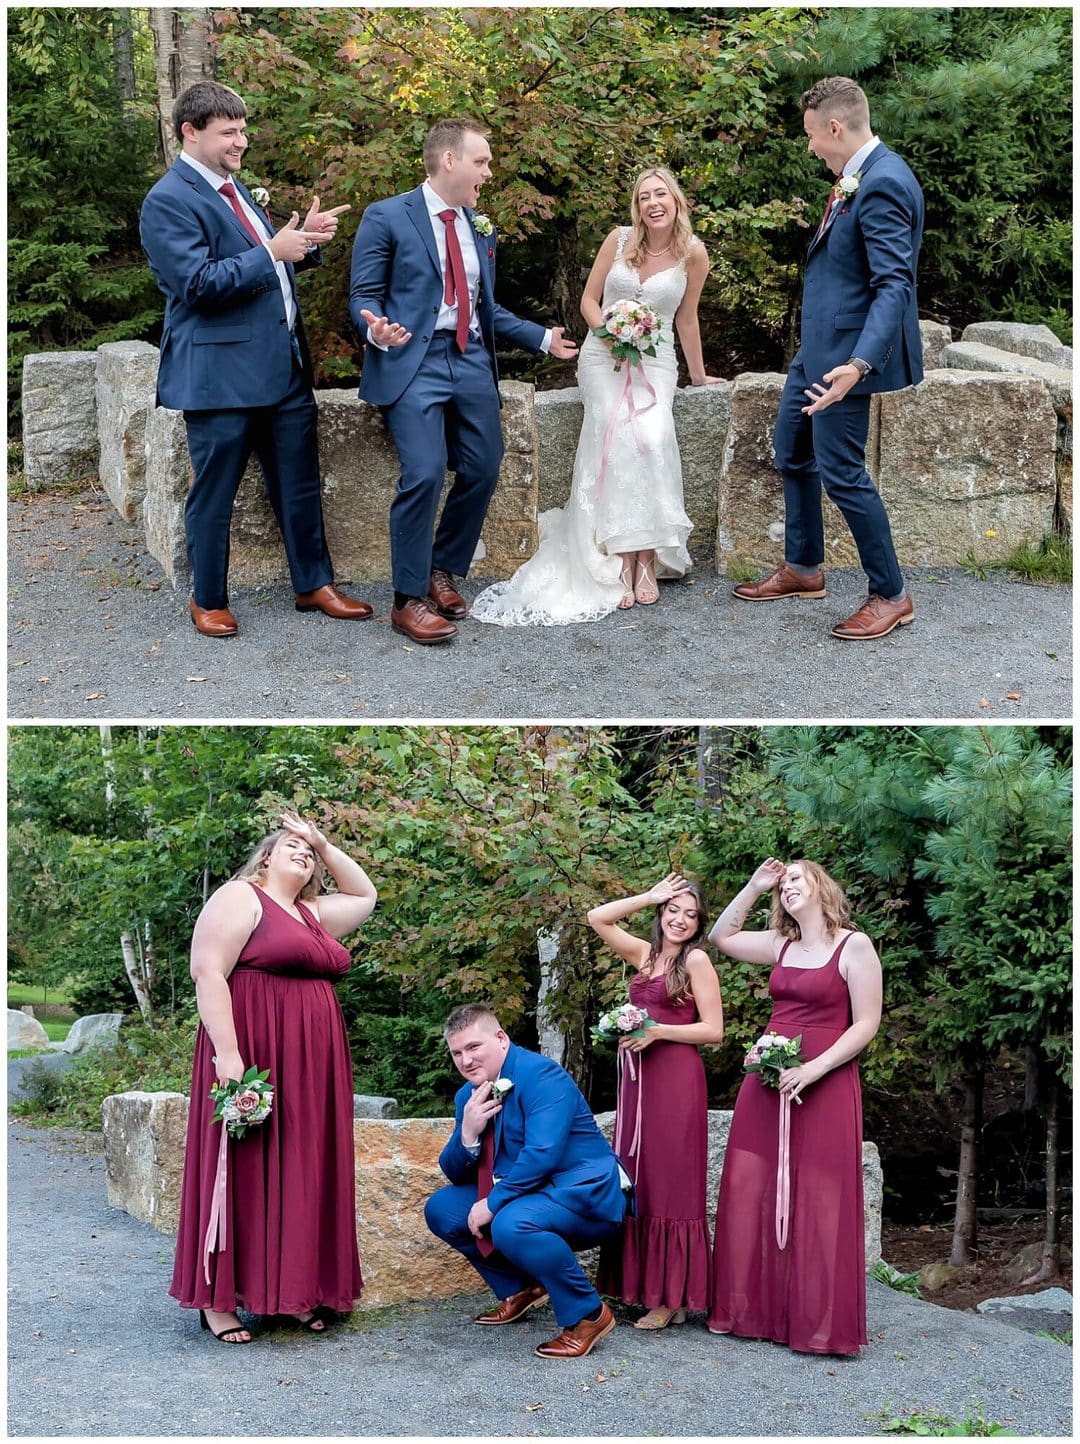 The bridal party have fun with the groom while the bride has fun with the groomsmen during their wedding photos at Sir Sandford Fleming Park in Halifax, NS.